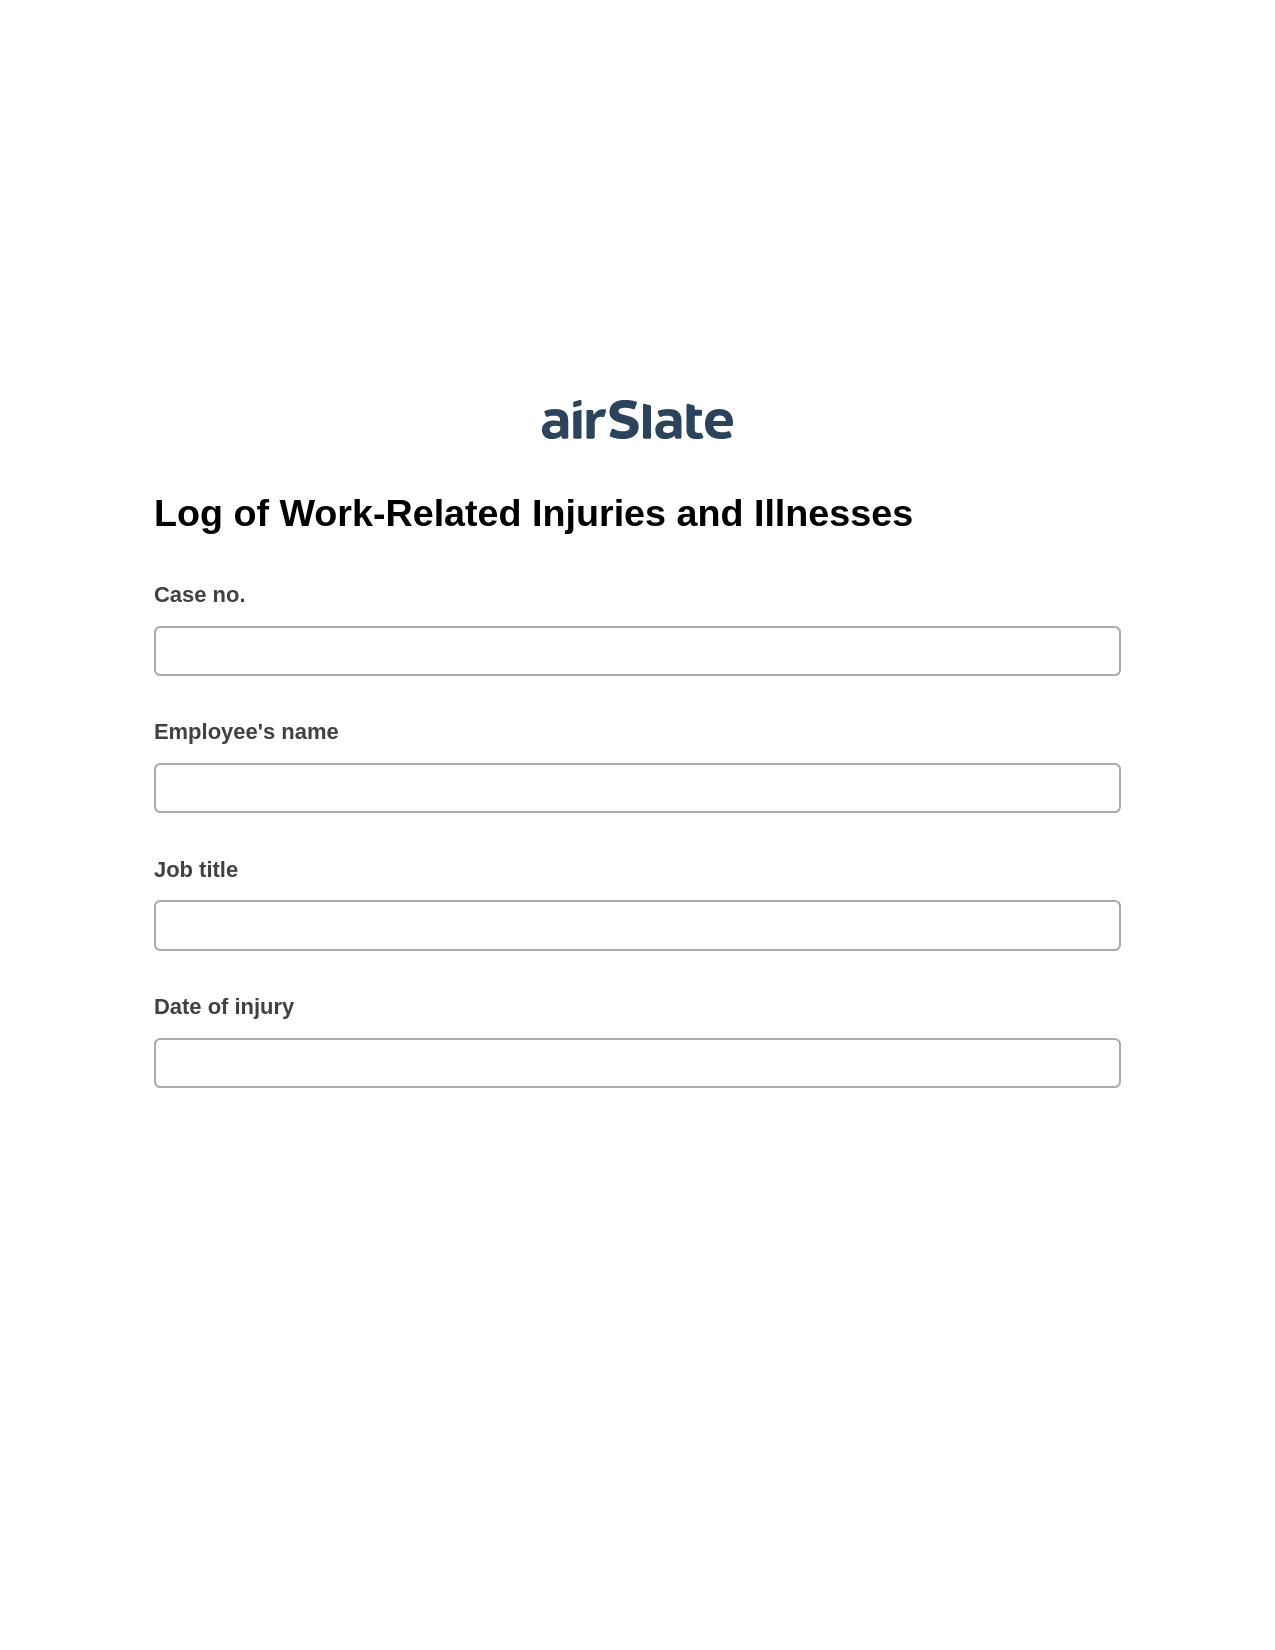 Multirole Log of Work-Related Injuries and Illnesses Pre-fill Dropdown from Airtable, Invoke Salesforce Process Bot, Slack Two-Way Binding Bot